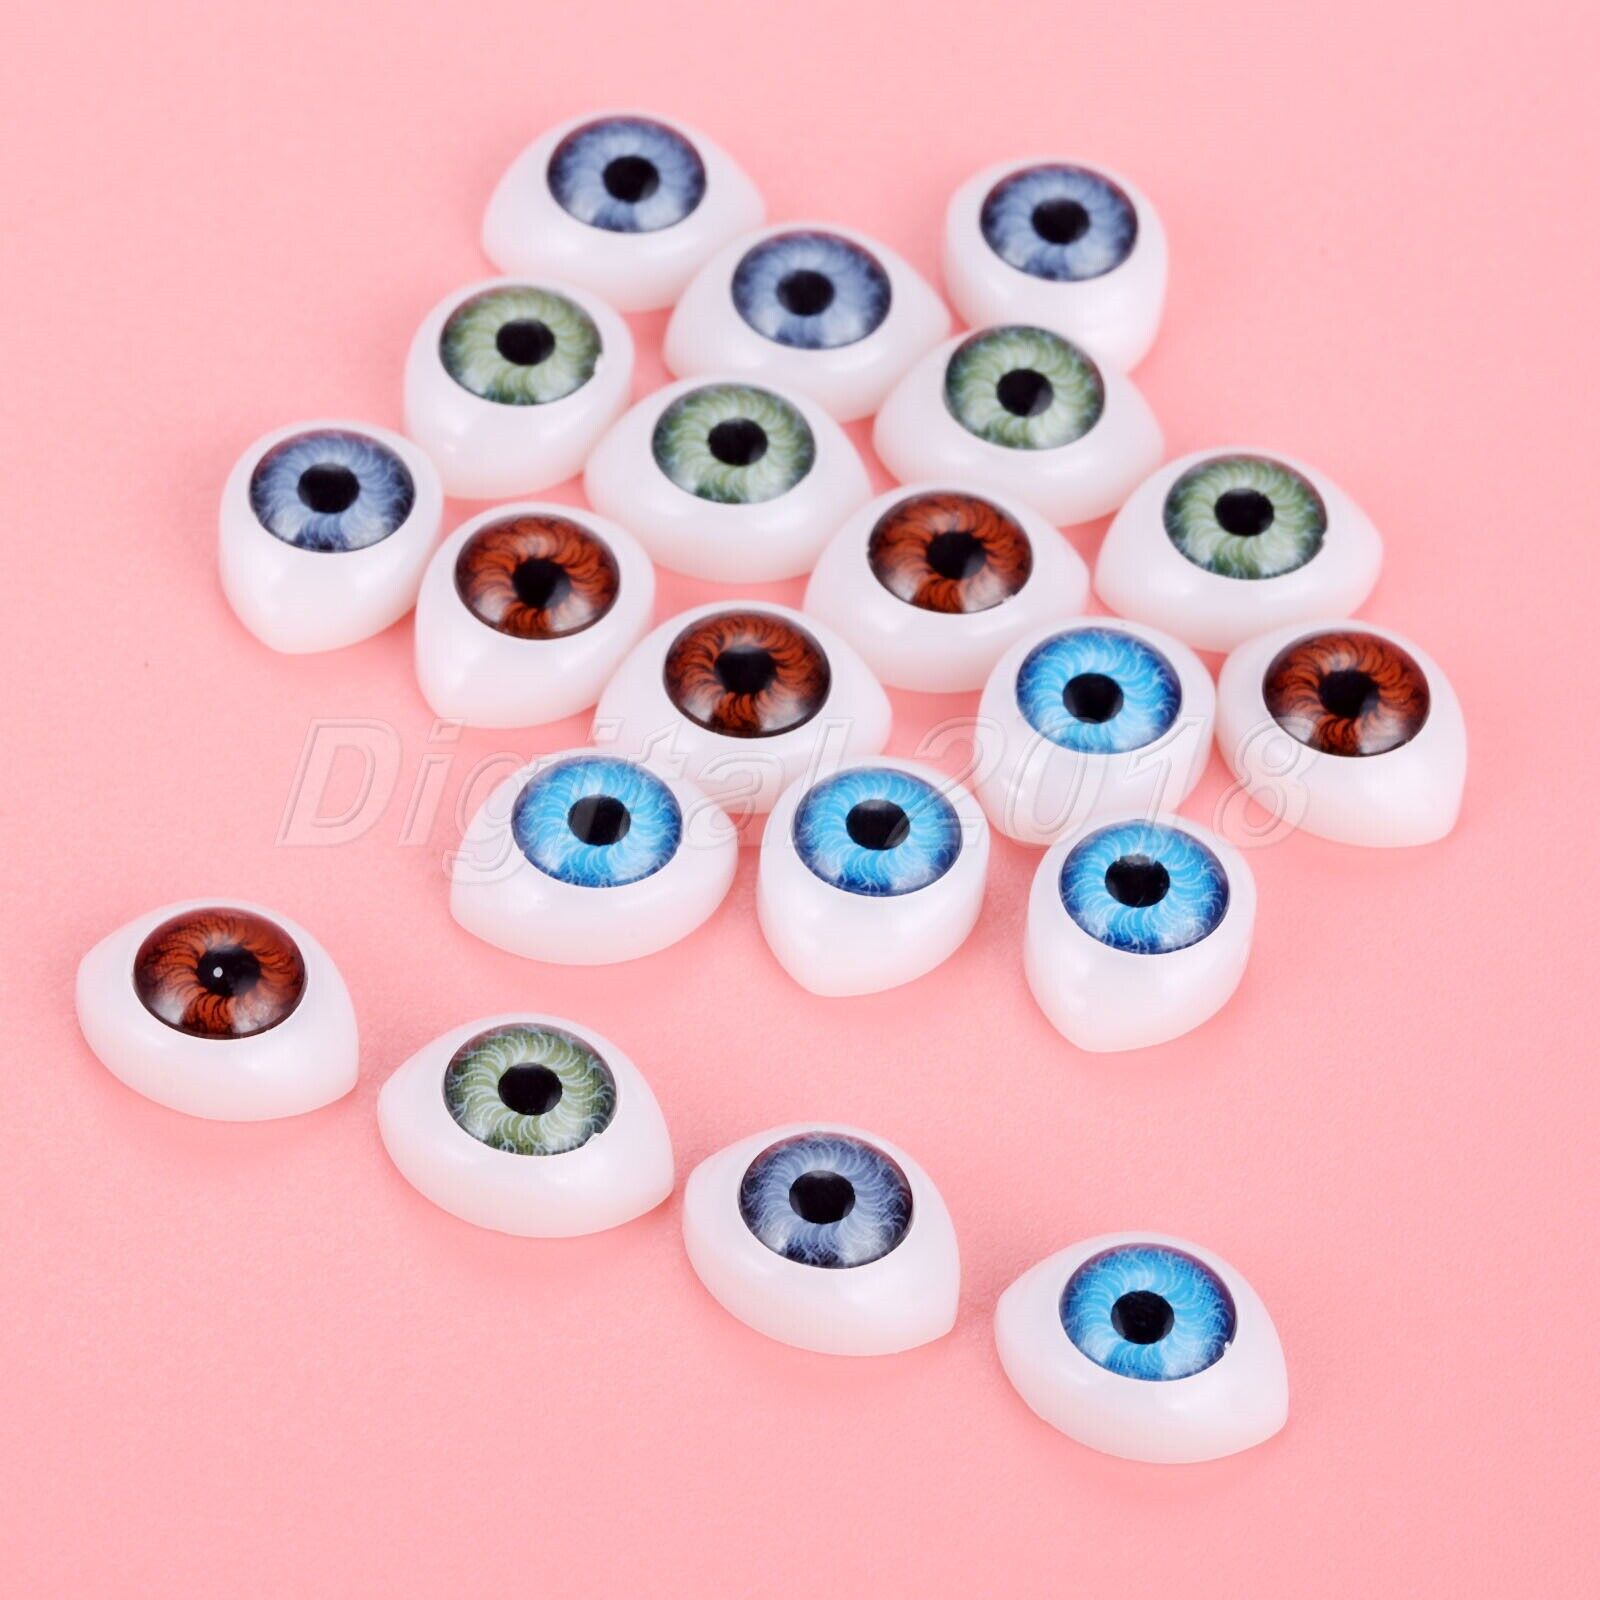 100Pcs 0.47"*0.63" Safety Doll Eyes Toys For Doll Making Eyes Doll Accessories Unbranded Does Not Apply